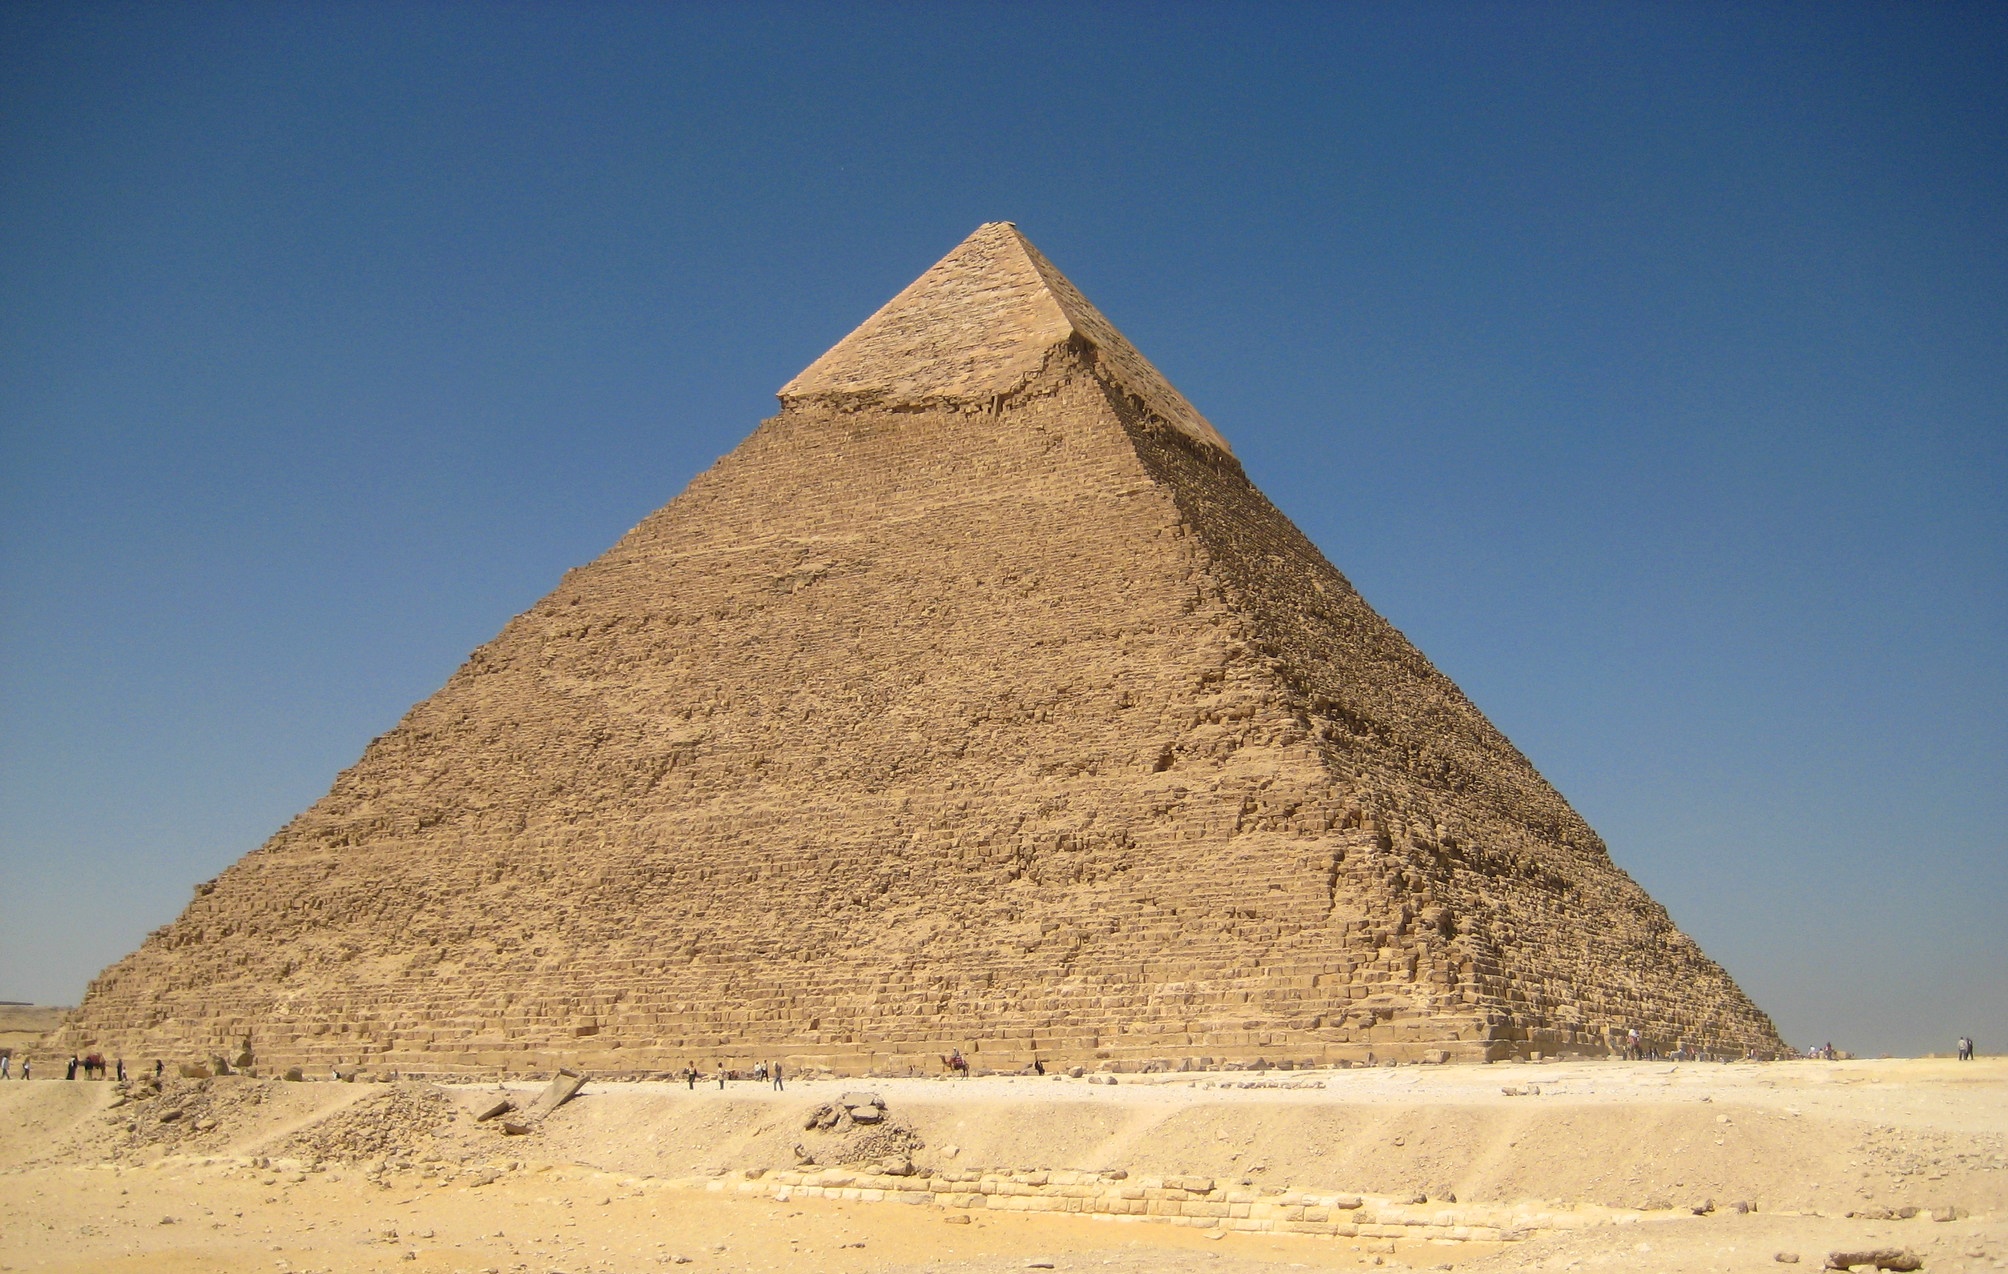 The Pyramids of Mekrynius- Tour to Giza Pyramids and the Egyptian museum